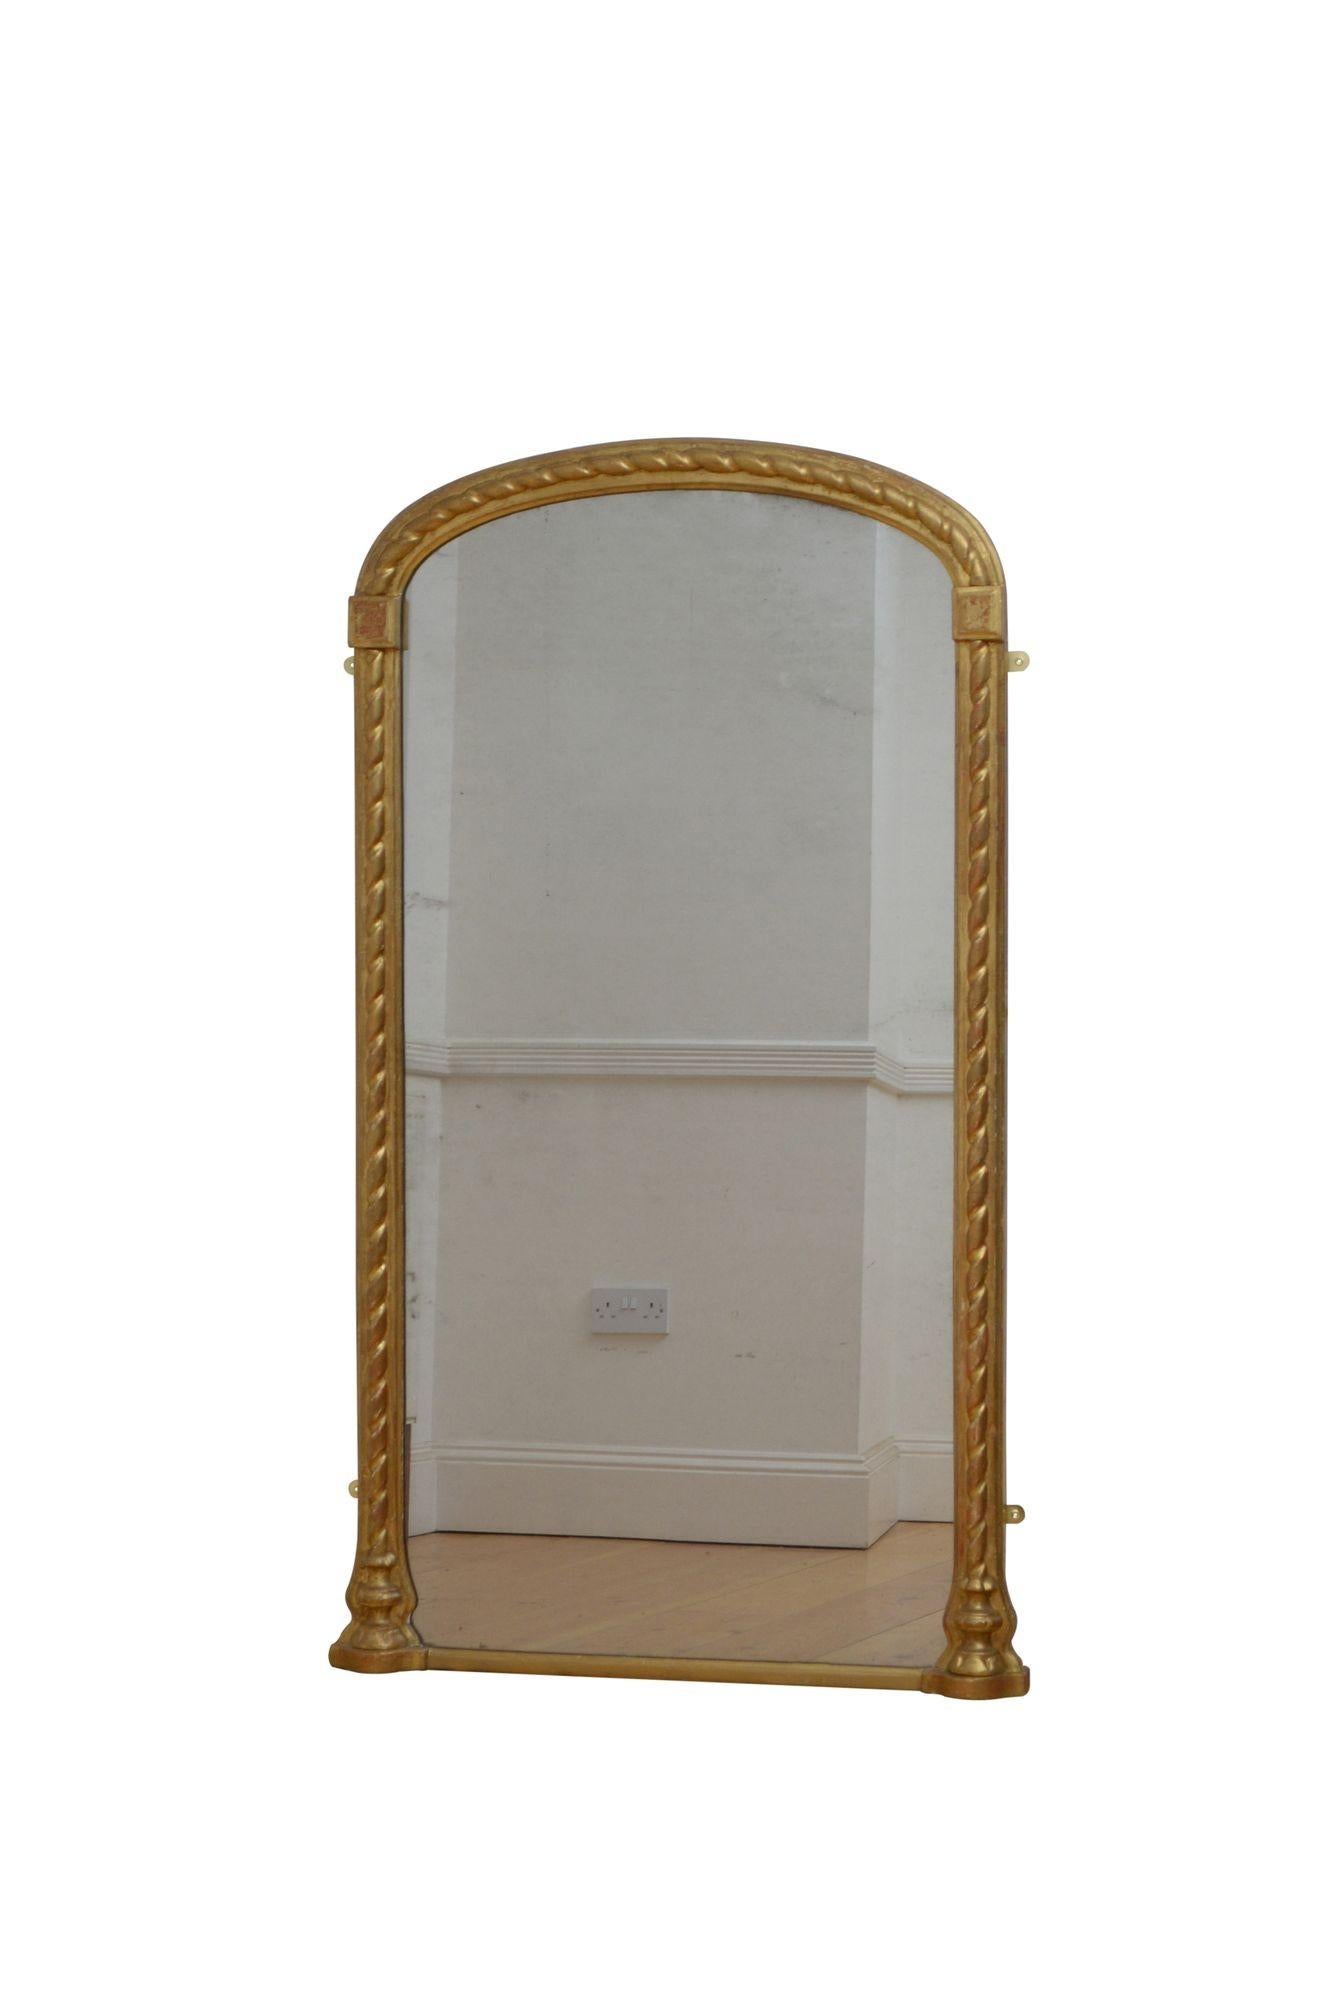 K0606  A good 19th century gilded pier mirror or wall mirror, having original glass with some foxing in arched frame with moulded edge and rope carved decoration. This antique console table mirror retains its original glass, some original gilt /